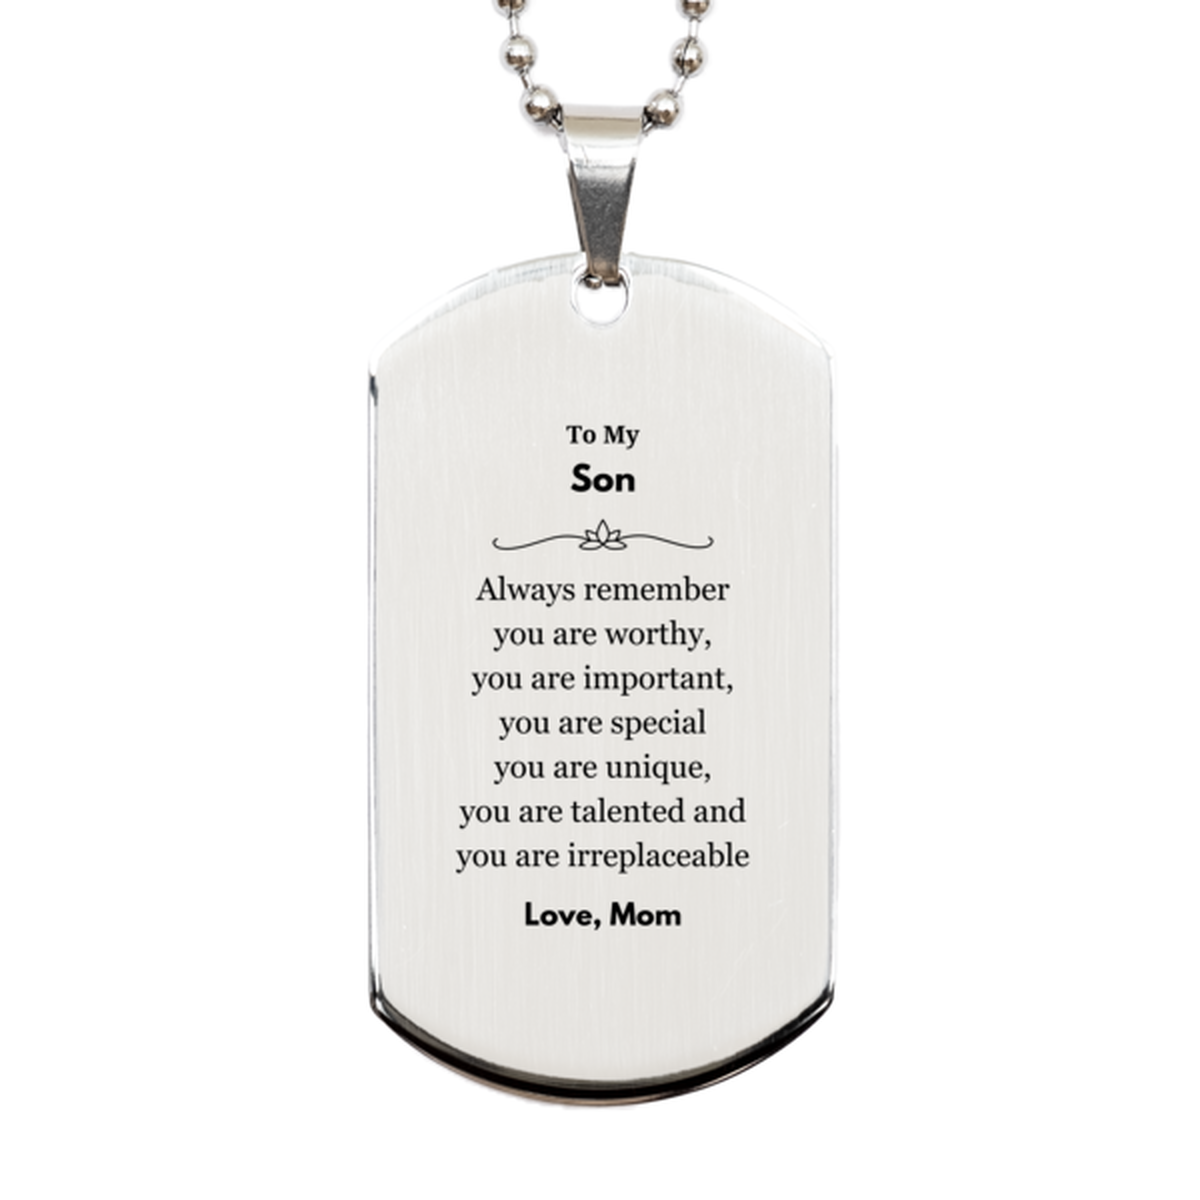 Son Birthday Gifts from Mom, Inspirational Silver Dog Tag for Son Christmas Graduation Gifts for Son Always remember you are worthy, you are important. Love, Mom